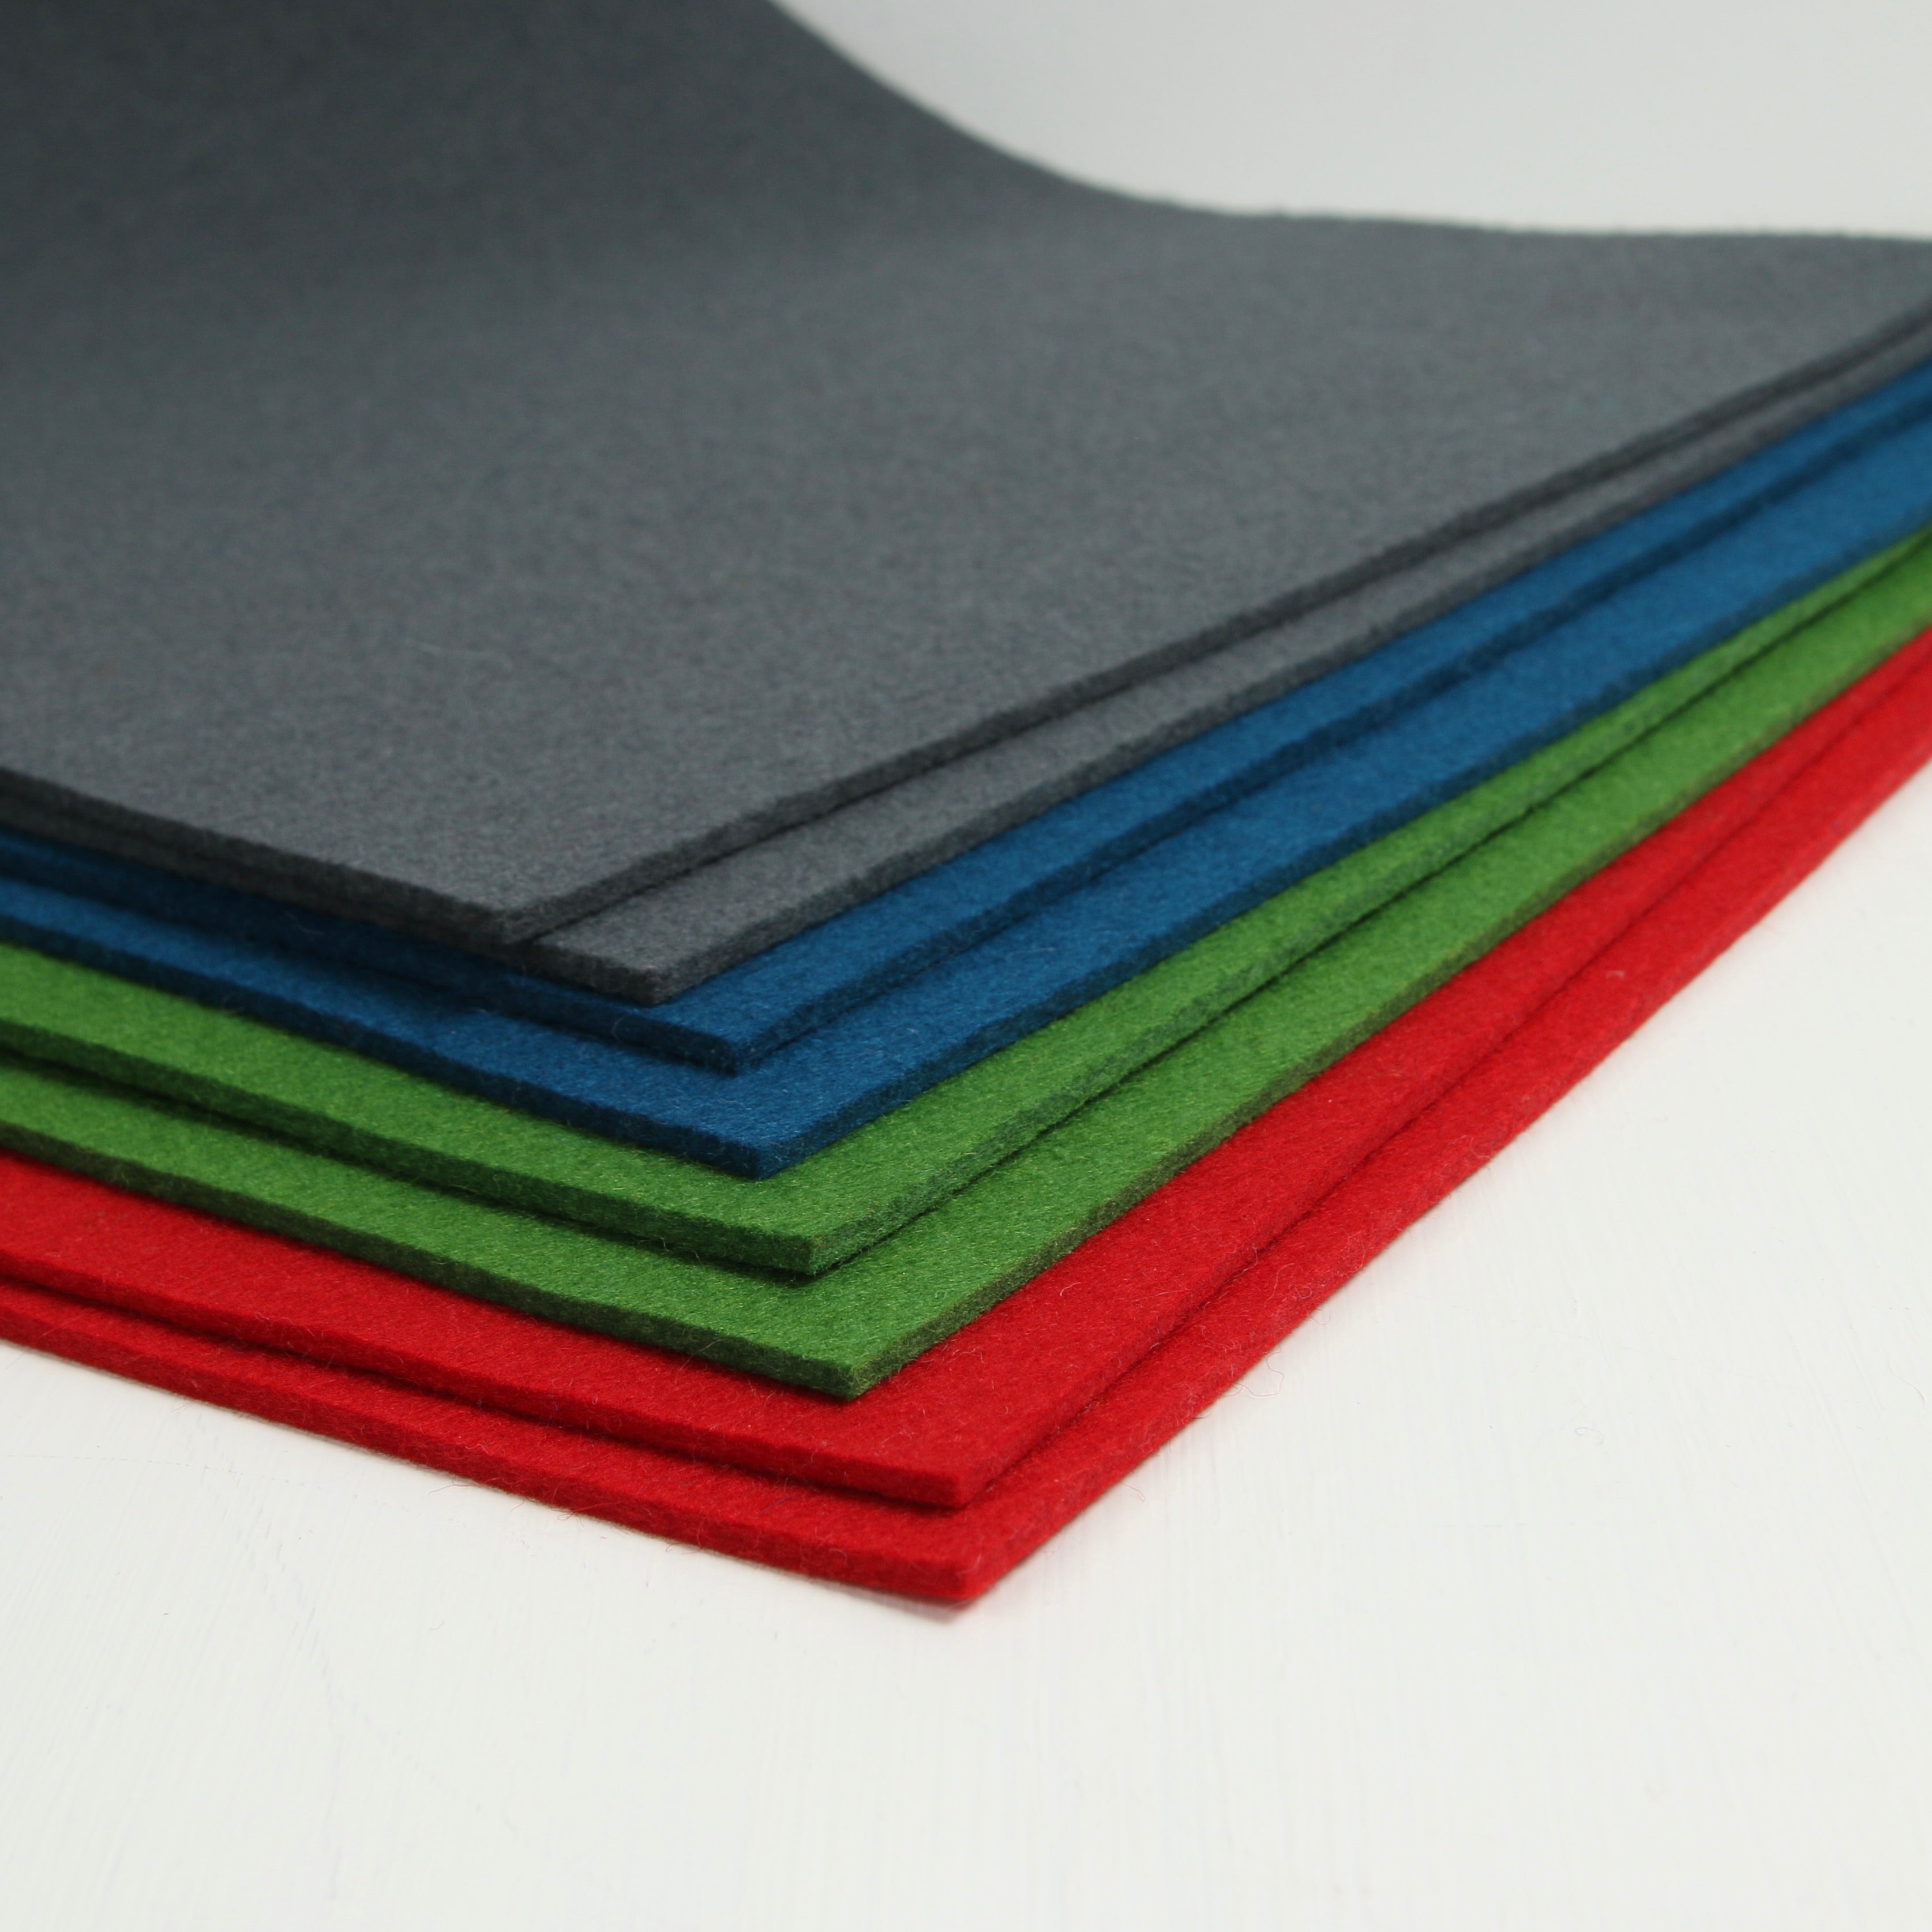 Made in USA 1/8 Thick x 60 Wide x 12 Long, Pressed Wool Felt Sheet 2  Lbs/Square Yd., Gray, 400 psi 